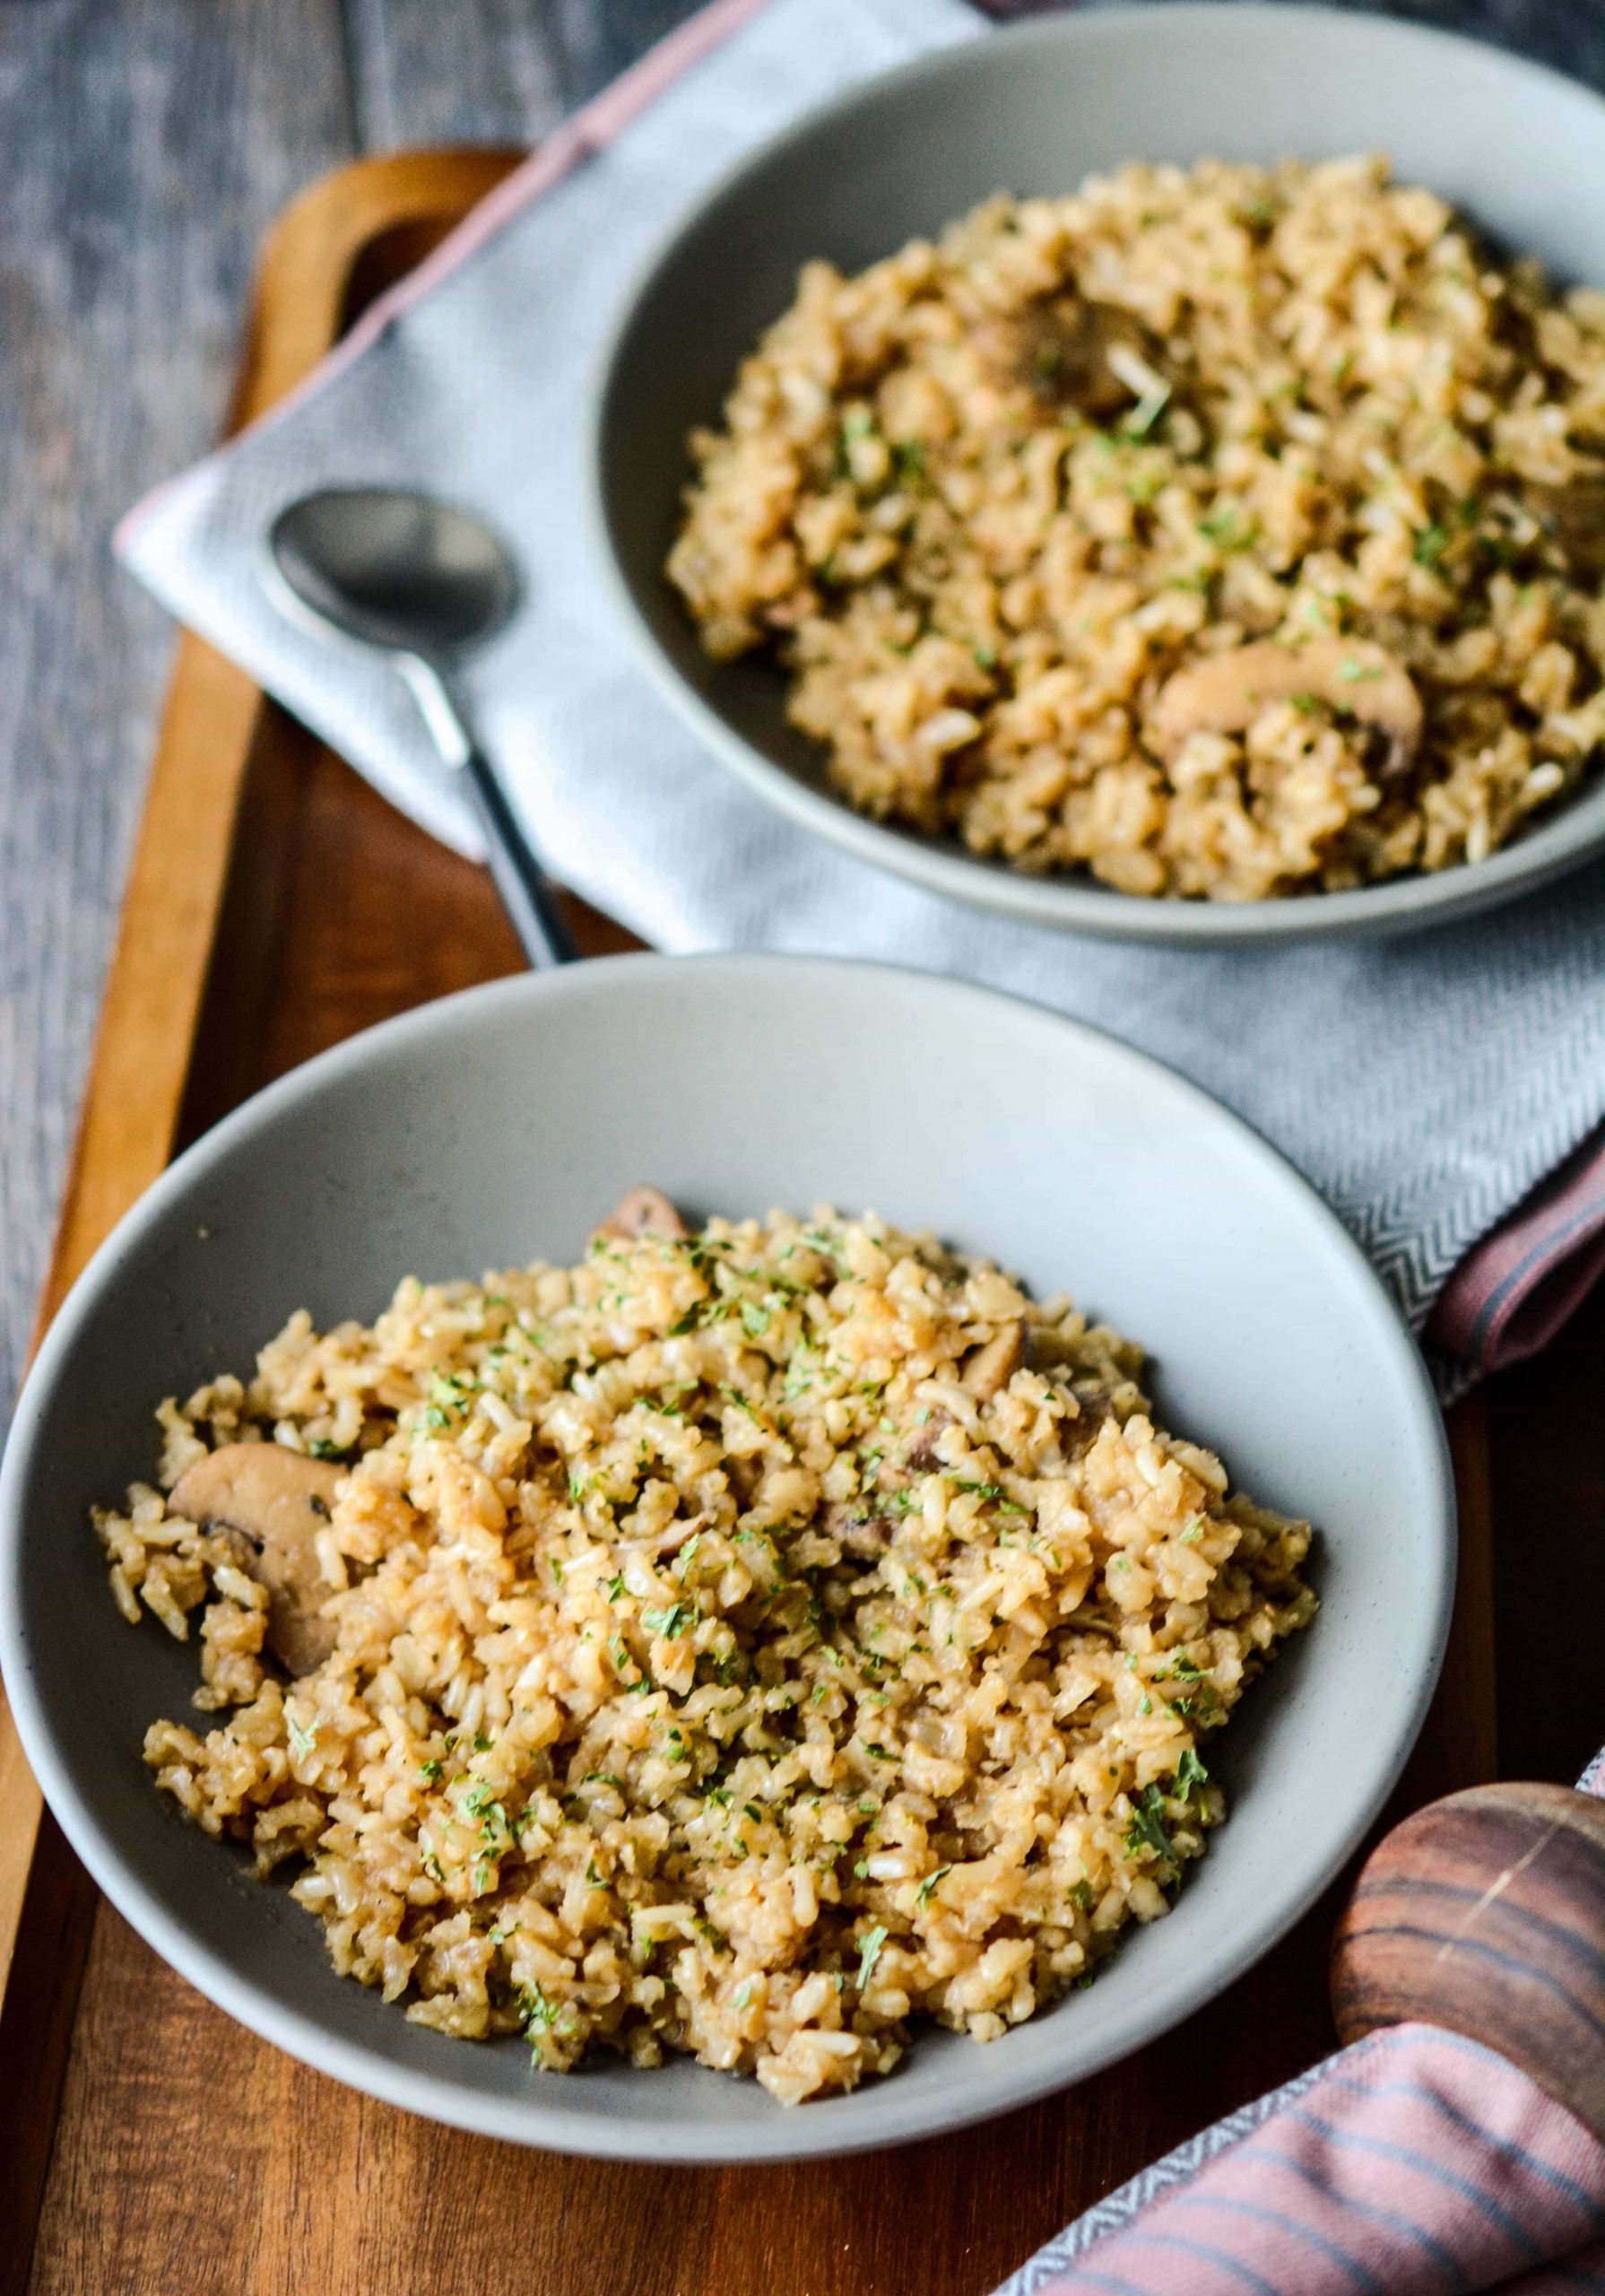 Brown Rice In Slow Cooker
 Slow Cooker Rustic Herbed Brown Rice Slow Cooker Gourmet